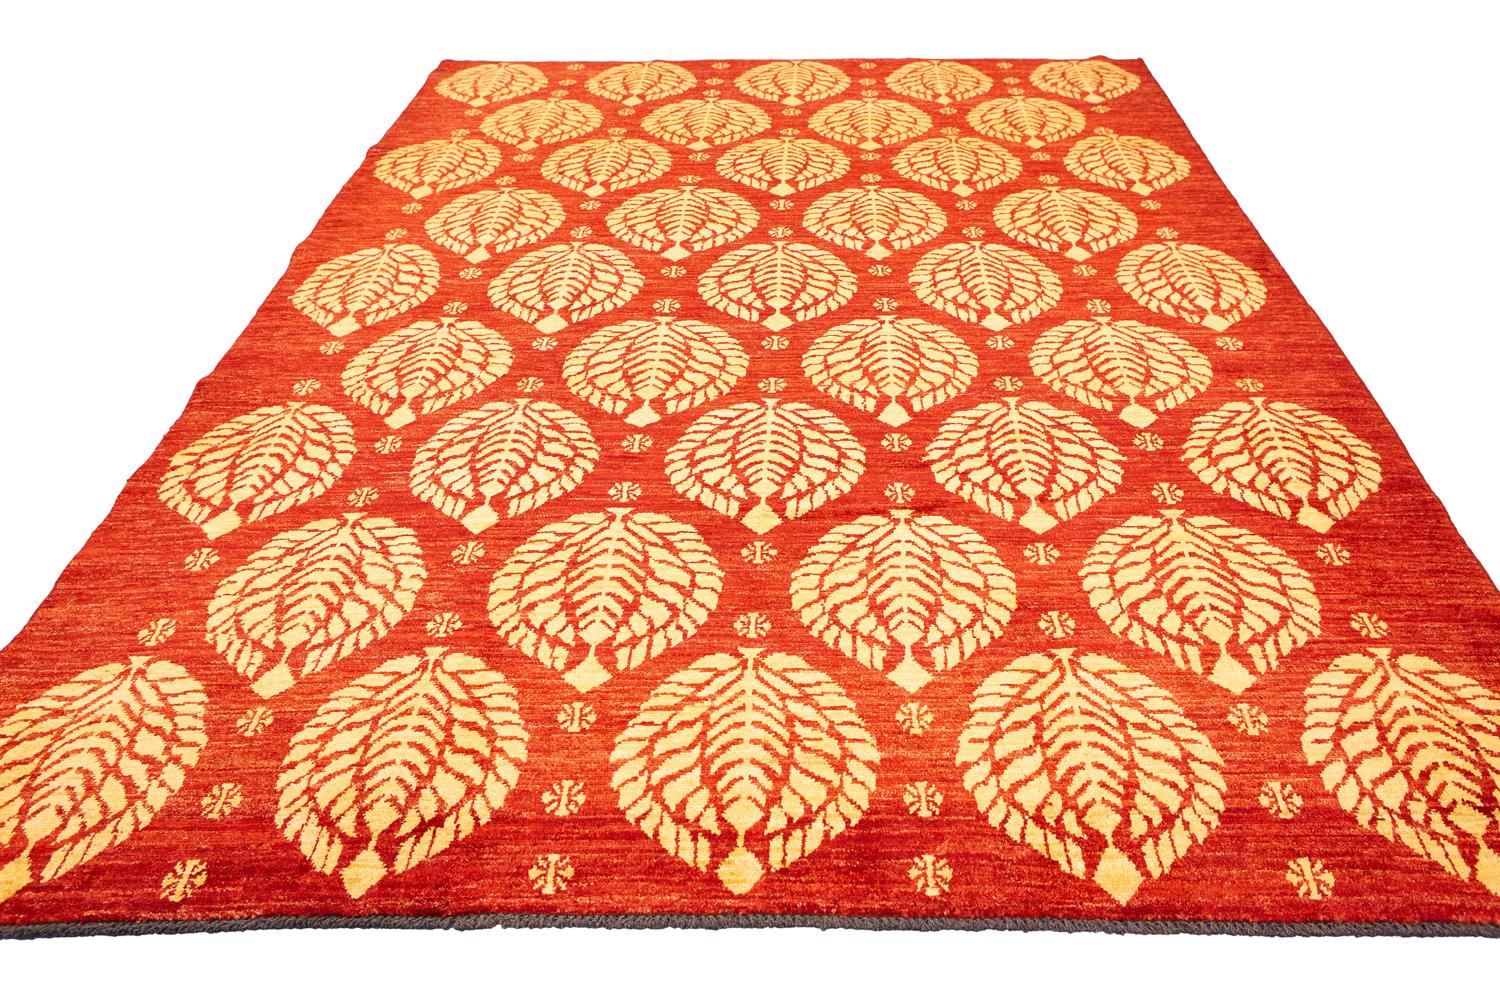 Pakistani Bold Design Hand-Knotted Vintage Red Field Etno Yadan Rug, XXI Century For Sale